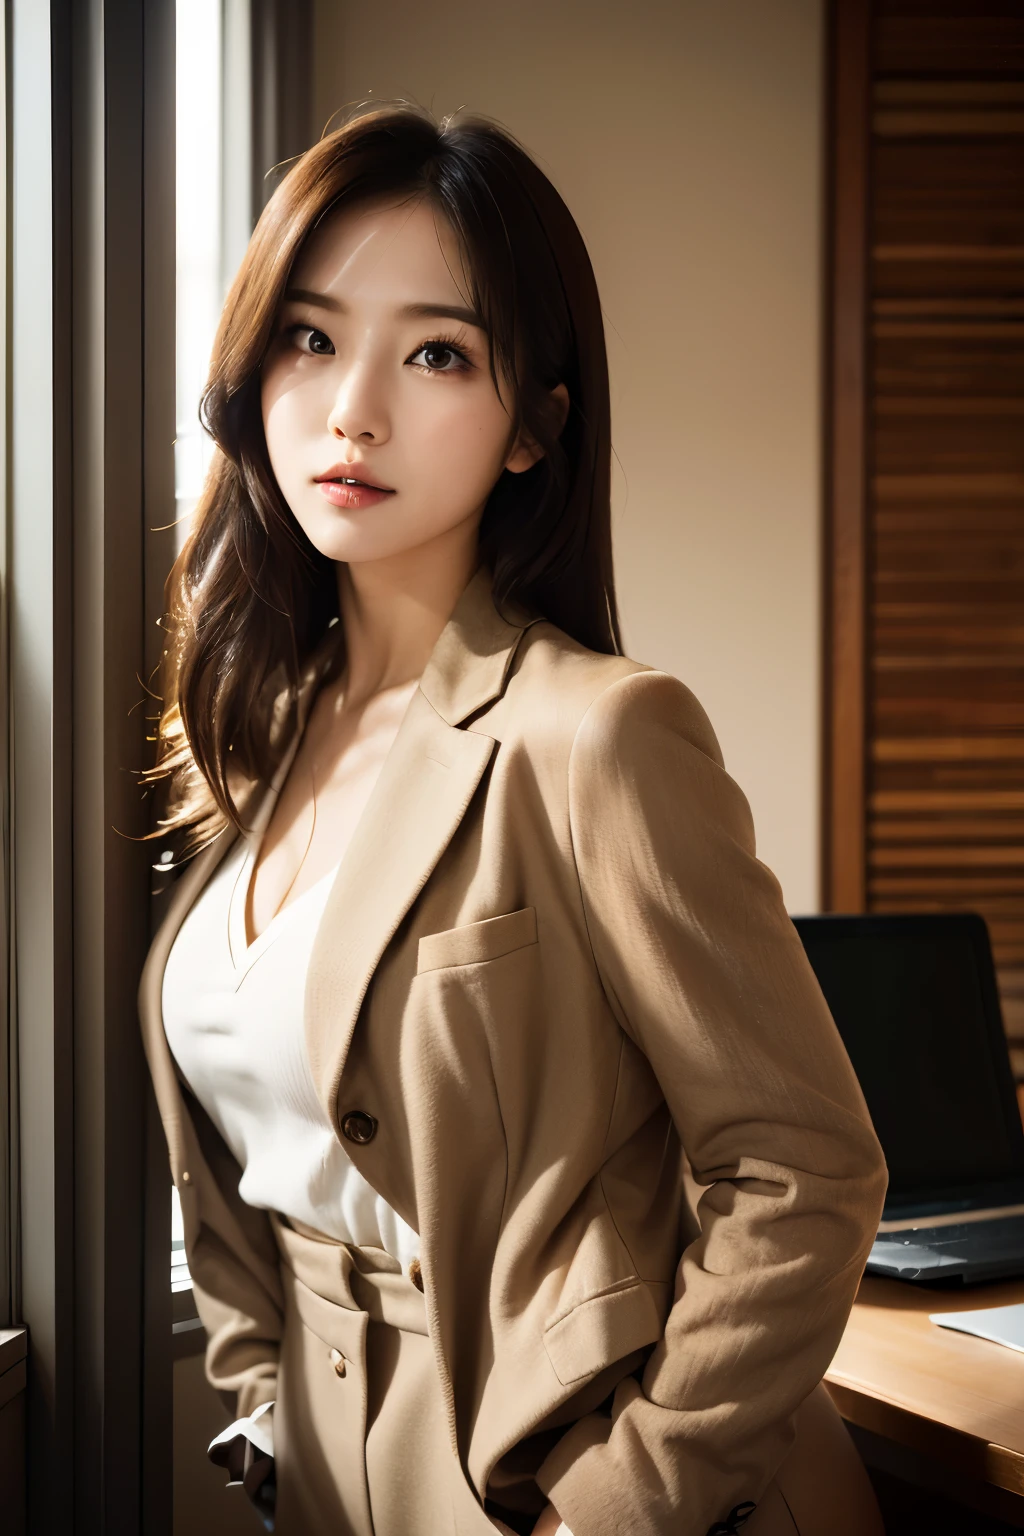 High-res, Realistic portrait of professional korean office lady with perfect skin，Professional suits，Women's suits，stand posture，The upper part of the body，Women in the workplace，Show confidence and maturity, Surrounded by a modern corporate environment, Vibrant and naturally lit highlights. The artwork should emphasize her elegant facial features, Including charming long eyes, Fluttering eyelashes and seductive lips. The scene should be enhanced with elements of professionalism and visual appeal，For example, Stylish work desk, Mainframe computers, High-resolution display, and complex stationery. The overall tone should be warm and professional, Has a soft and natural color palette. The artwork should exude a sense of professionalism, Success, and cultural pride，The background is blurred out